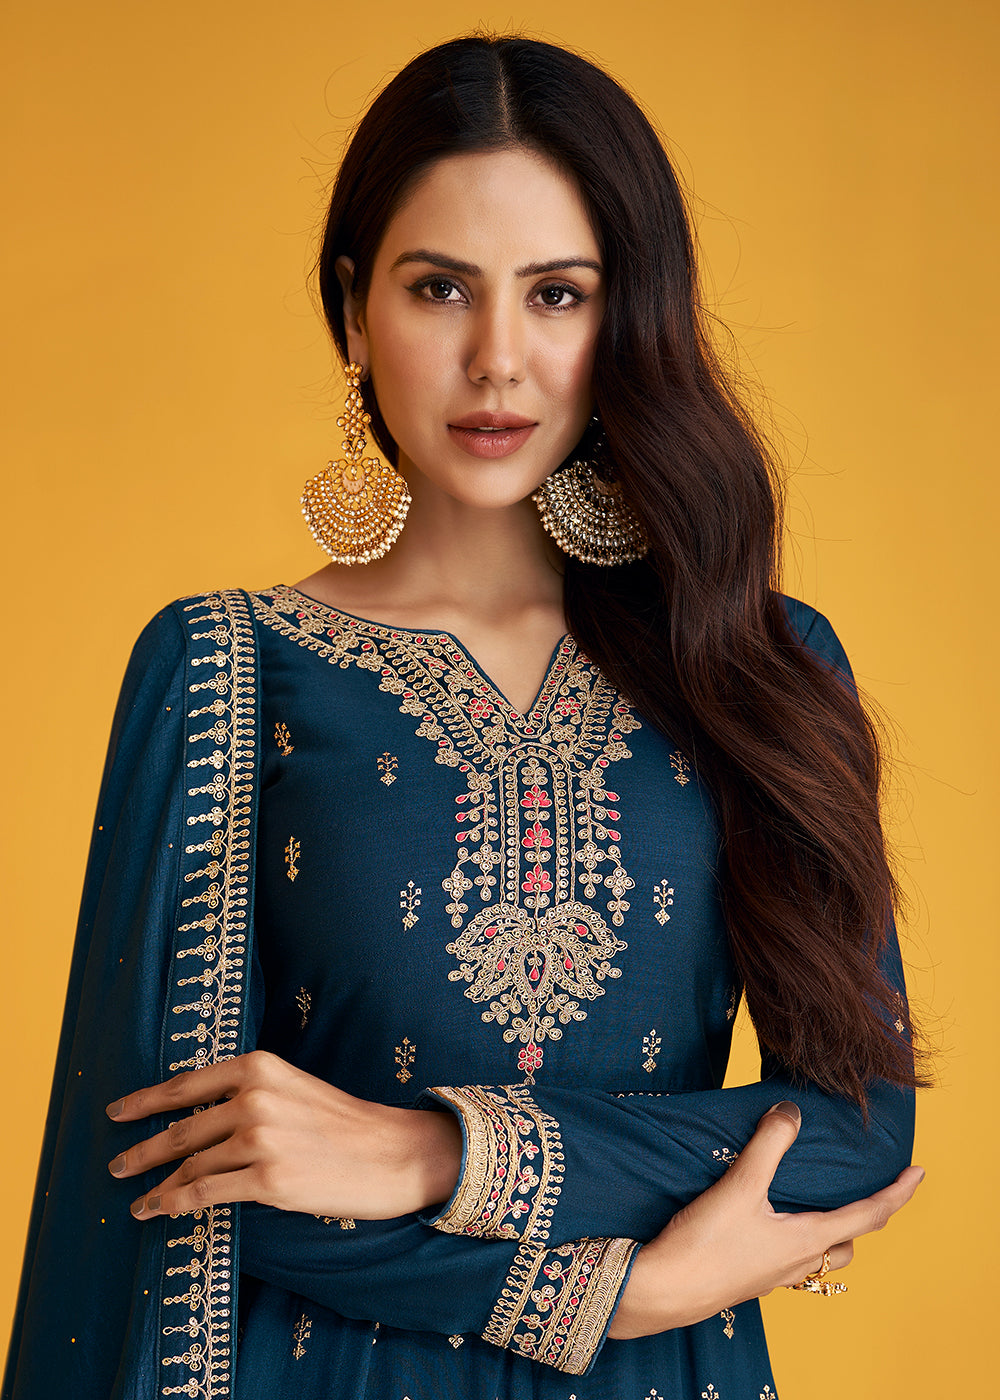 Shop Now Gorgeous Blue Silk Festive Anarkali Suit Online featuring Sonam Bajwa at Empress Clothing in USA.